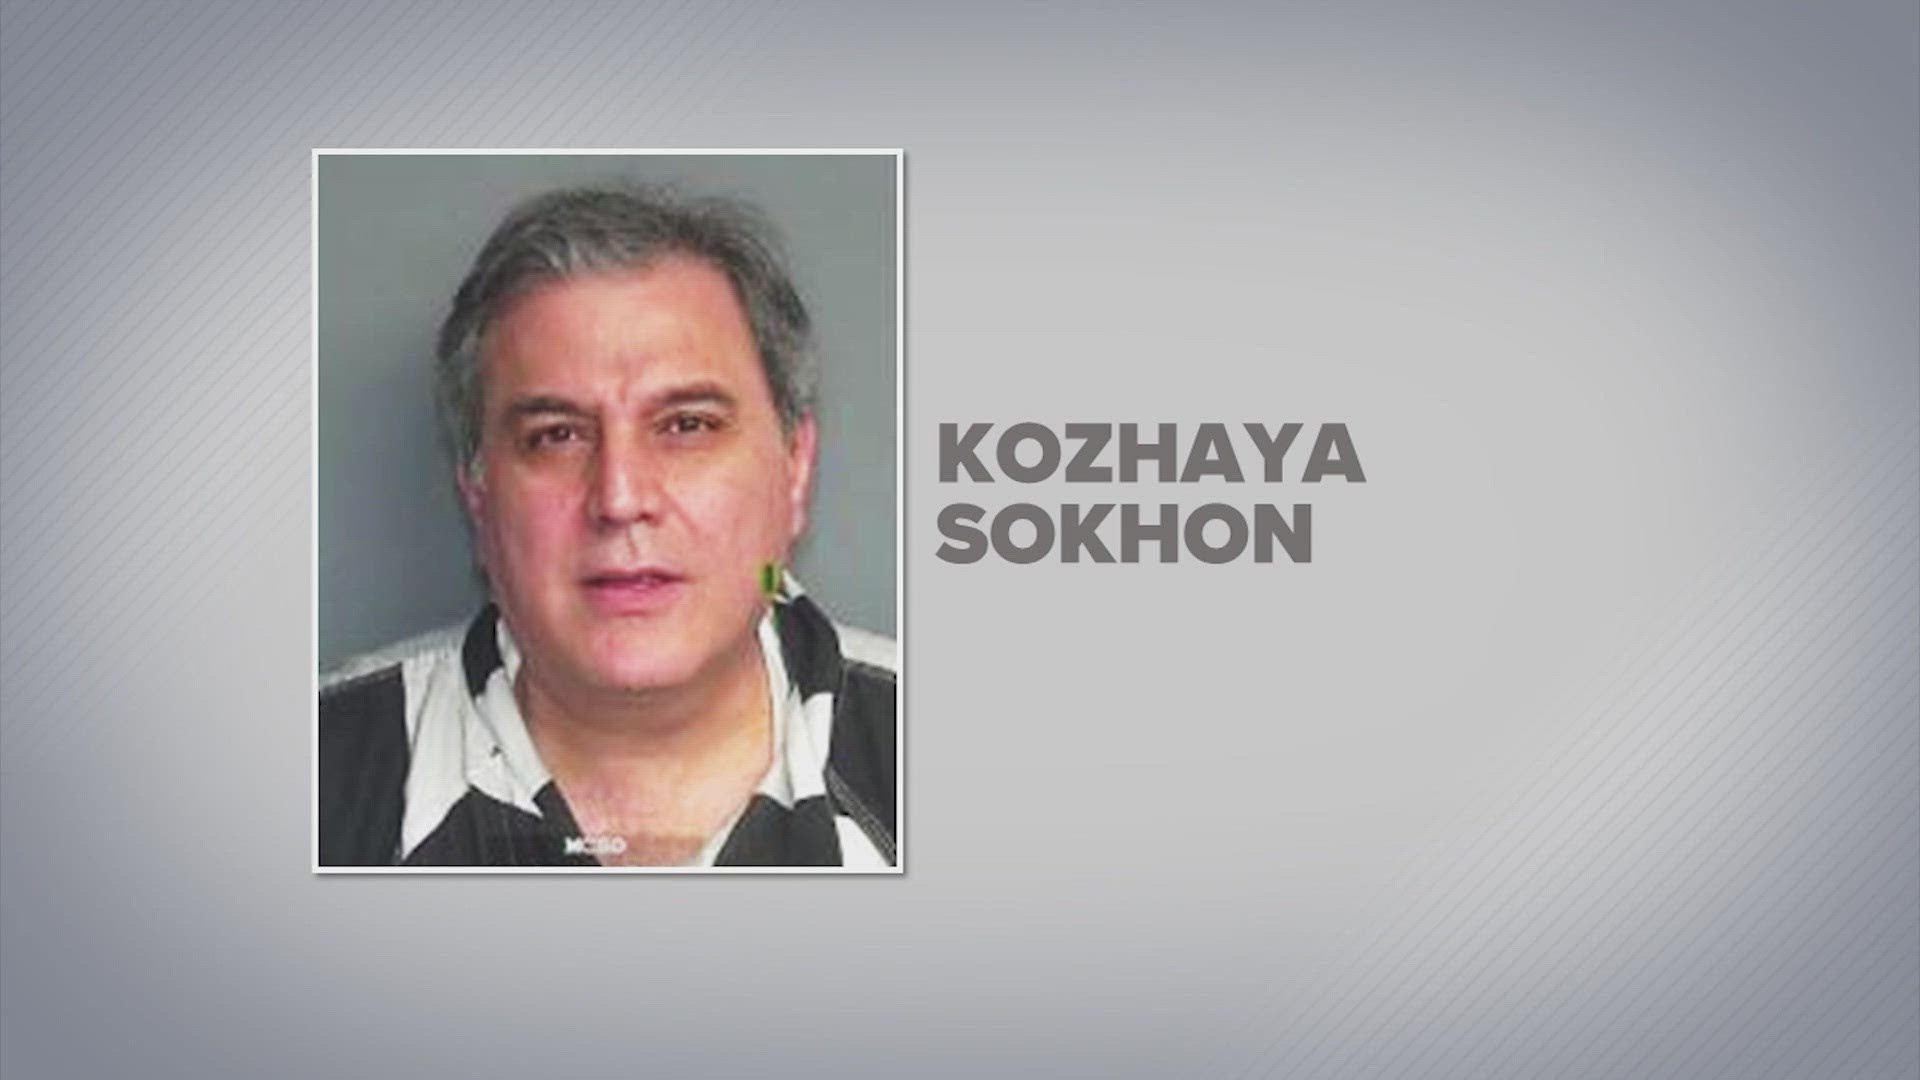 Dr. Kozhaya Sokhon is accused of inappropriate sexual contact with multiple patients. Investigators believe there are more victims.